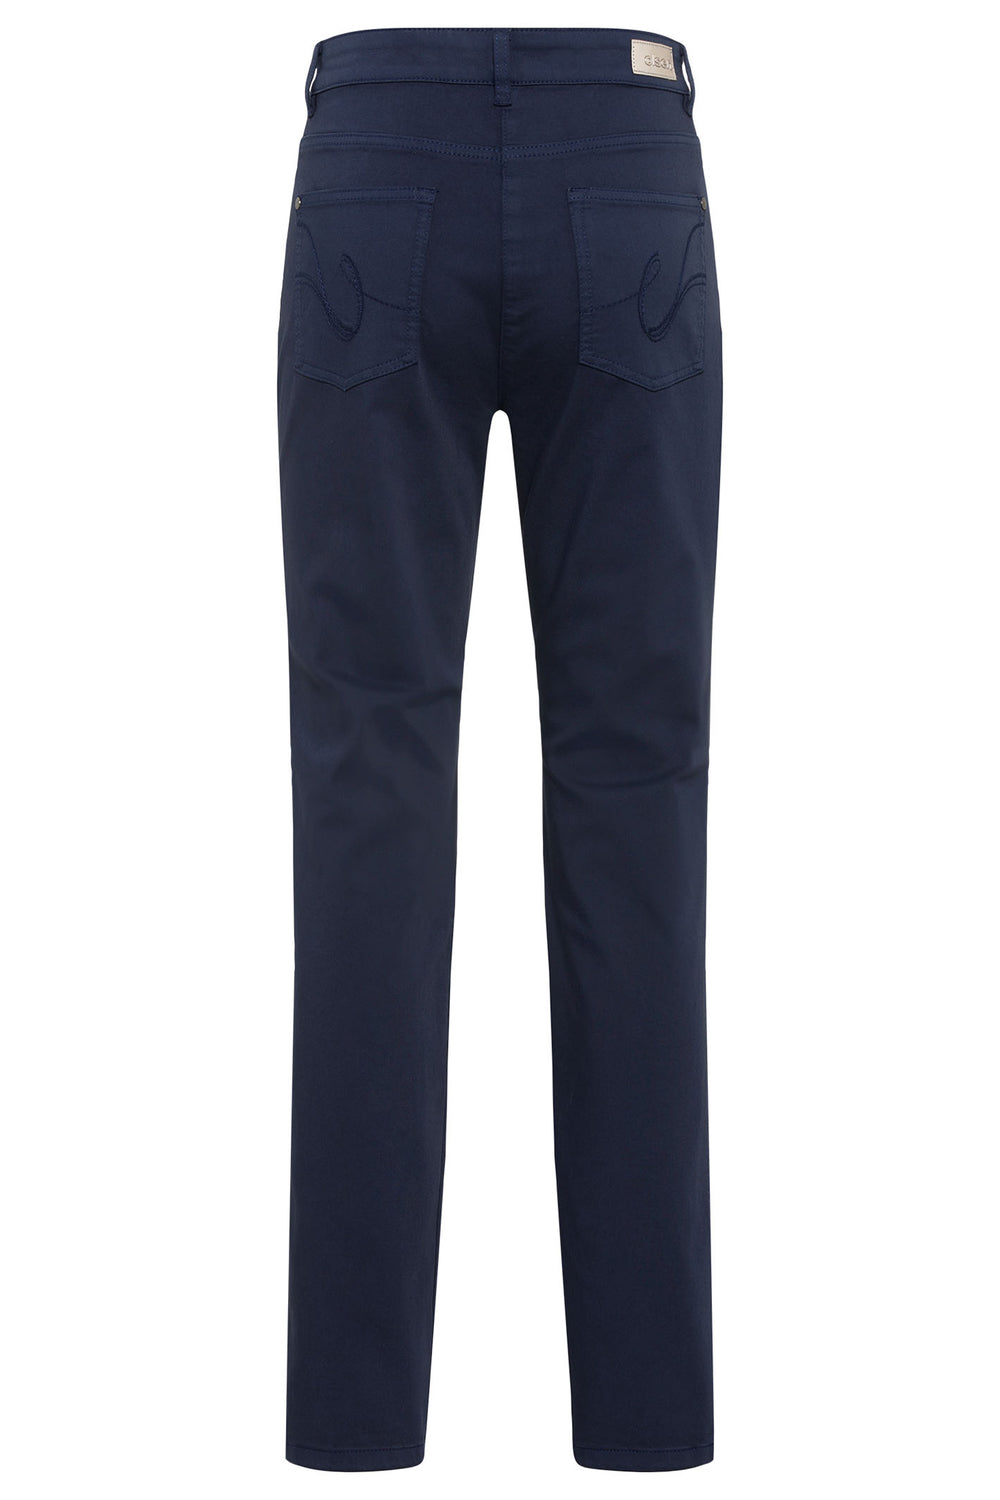 Olsen 14000120 Power Navy Five Pocket Casual Trousers - Dotique